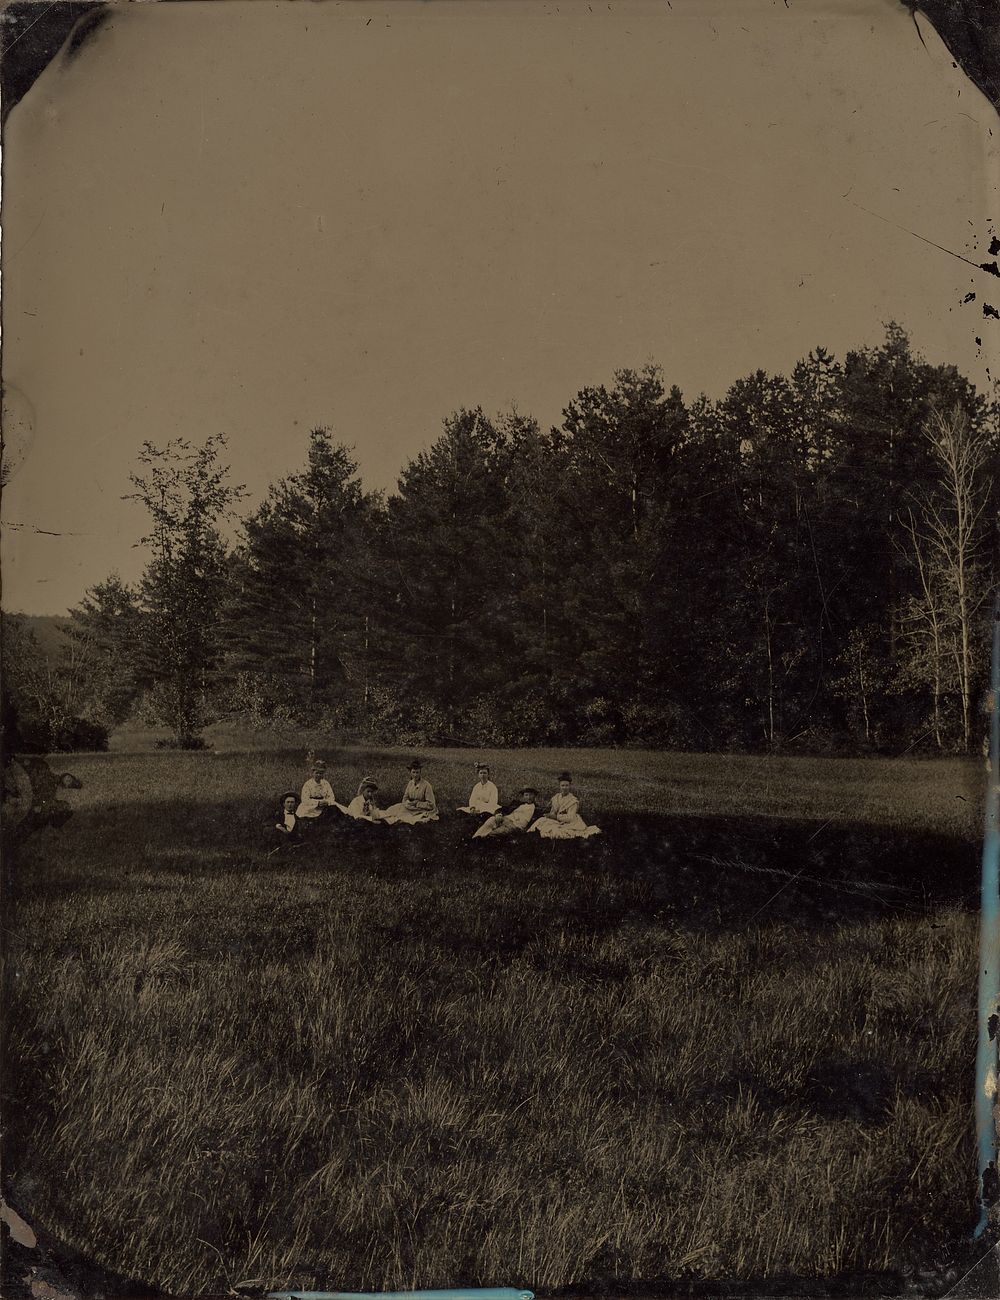 Group of picnickers in field